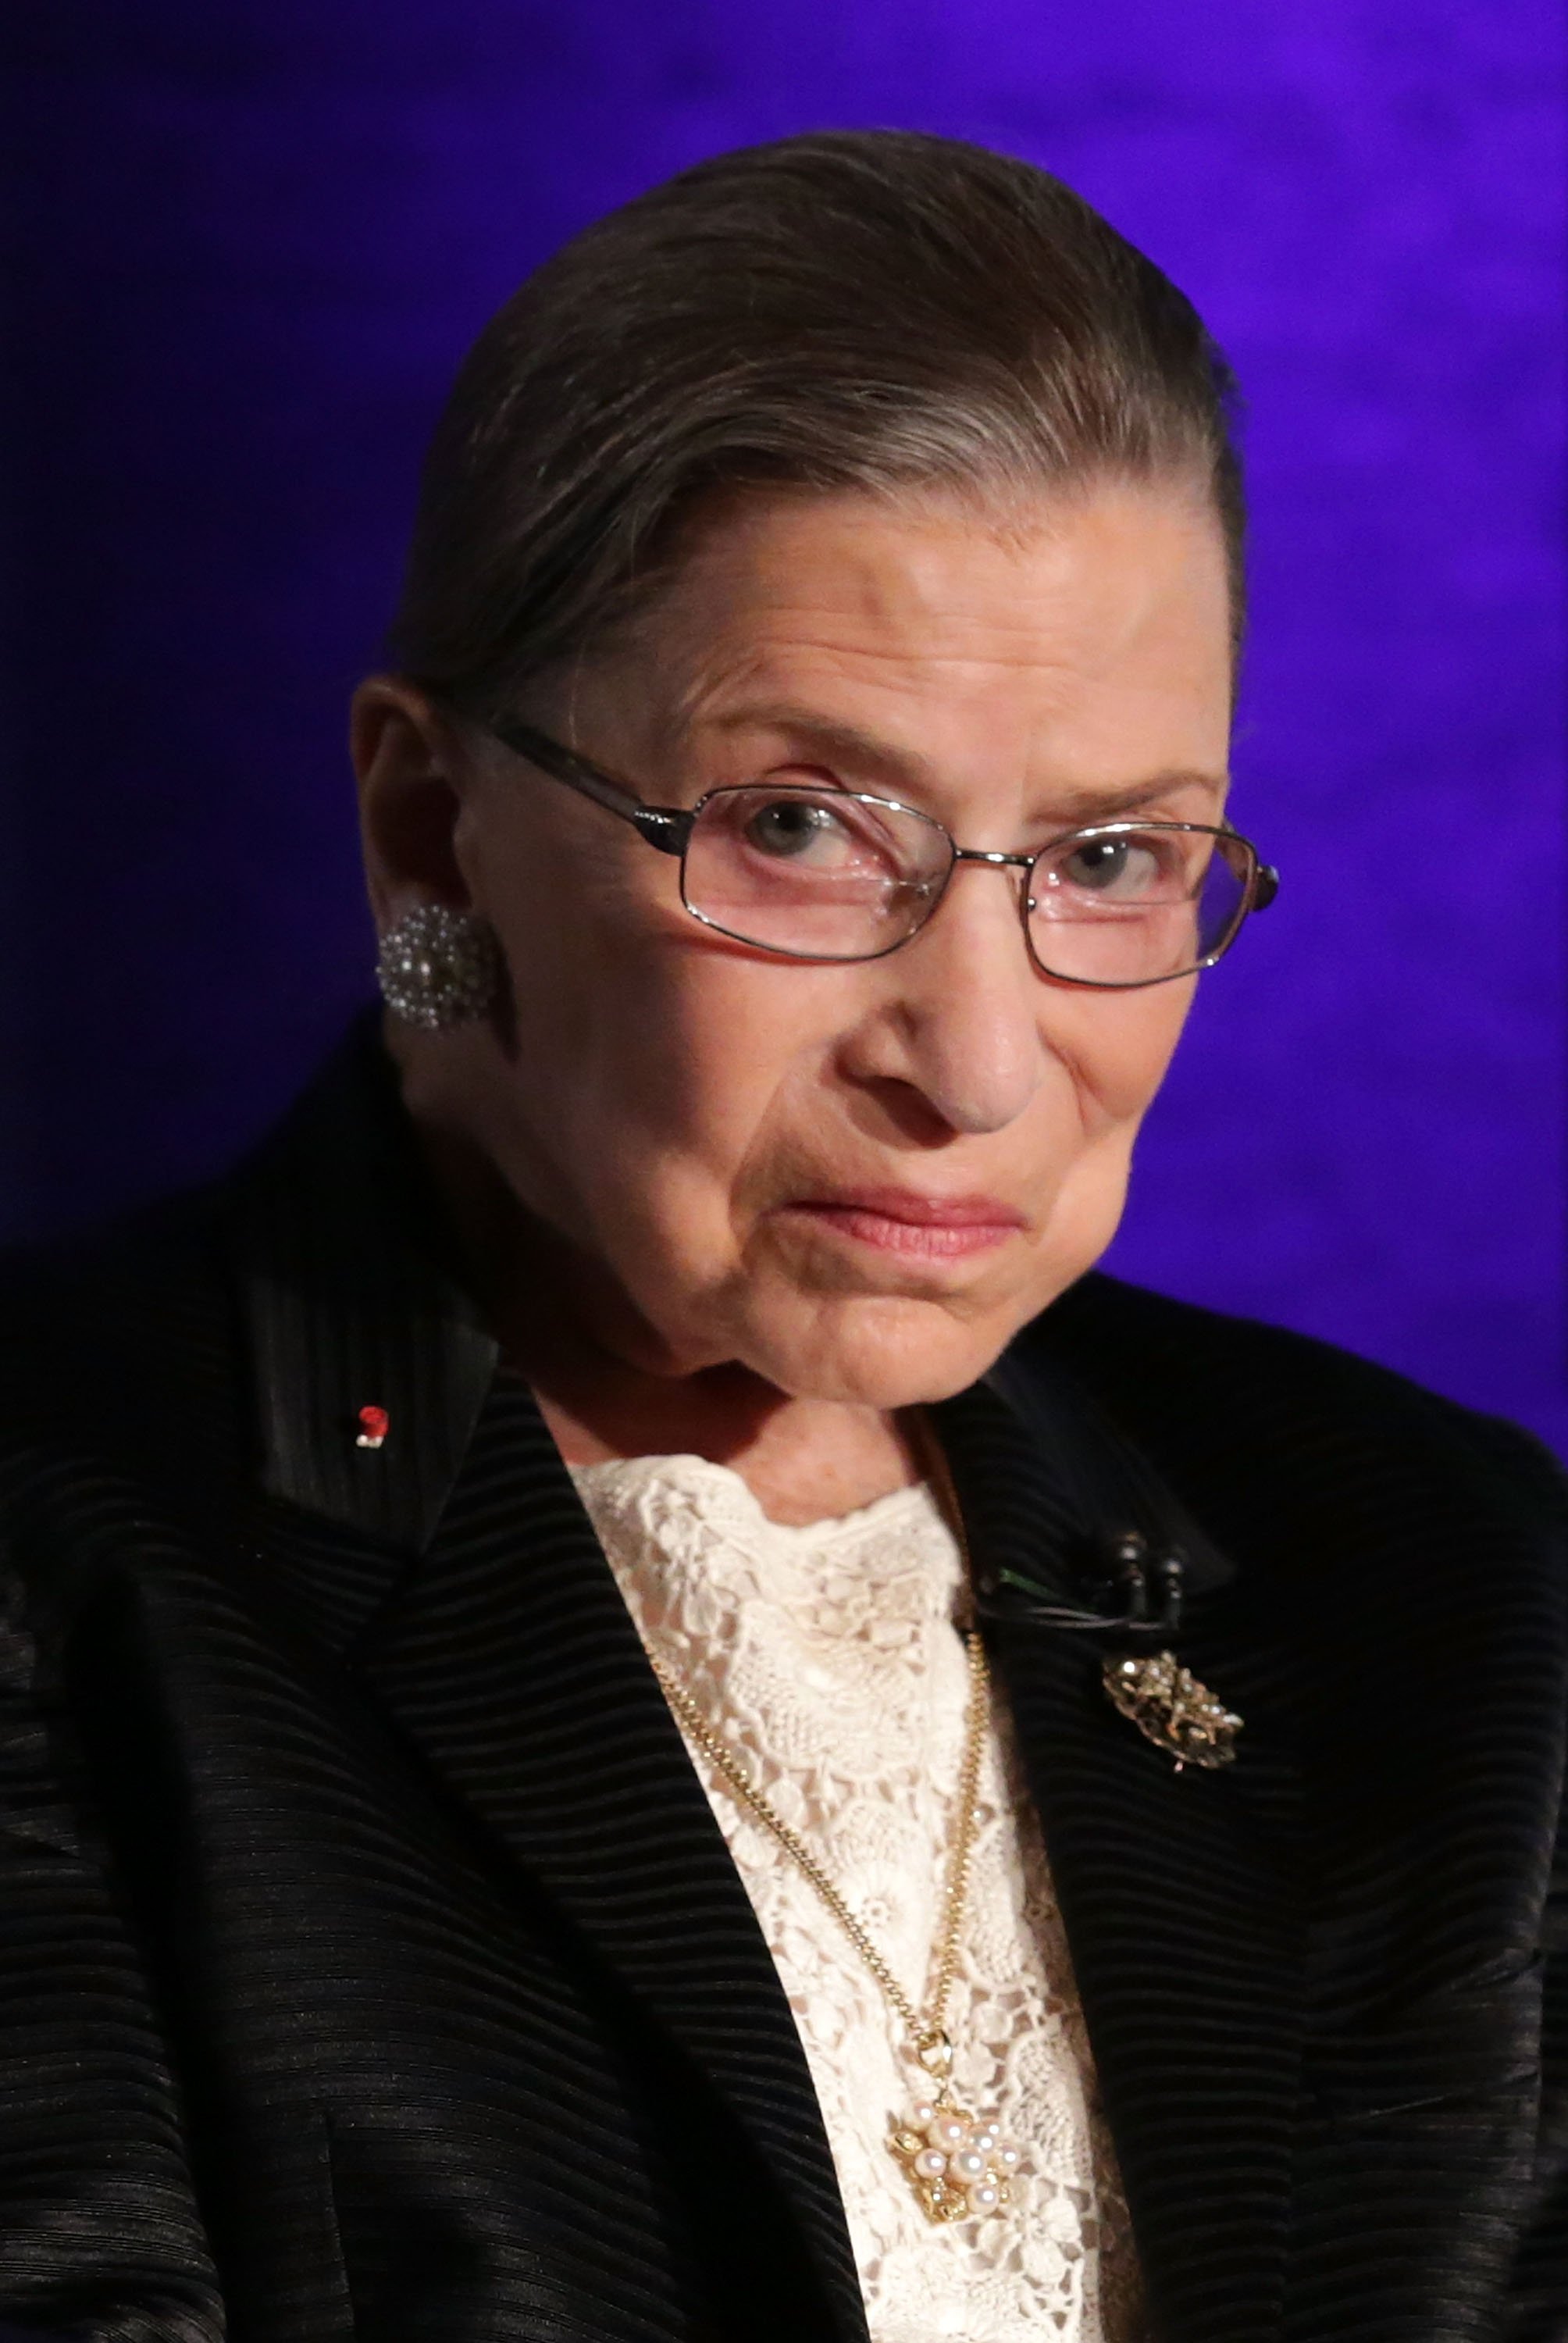 Late Supreme Court Justice Ruth Bader Ginsburg at the taping of "The Kalb Report" at the National Press Club in Washington, DC. | Photo: Alex Wong/Getty Images